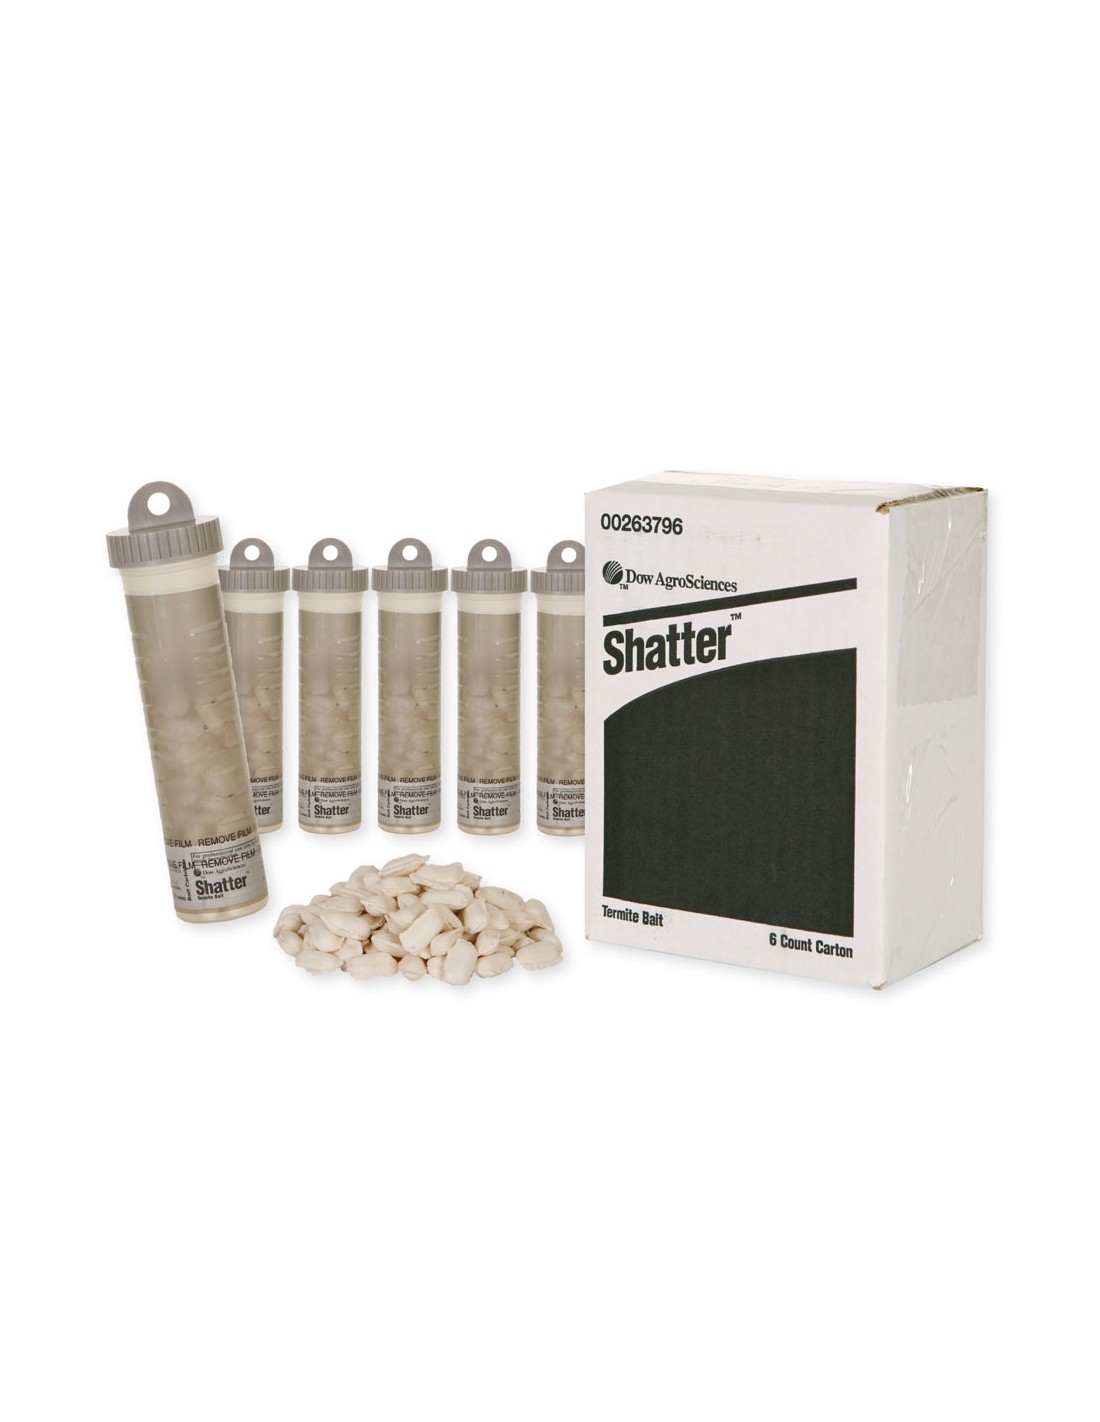 Termite Bait Stations & Traps: Do They Work?